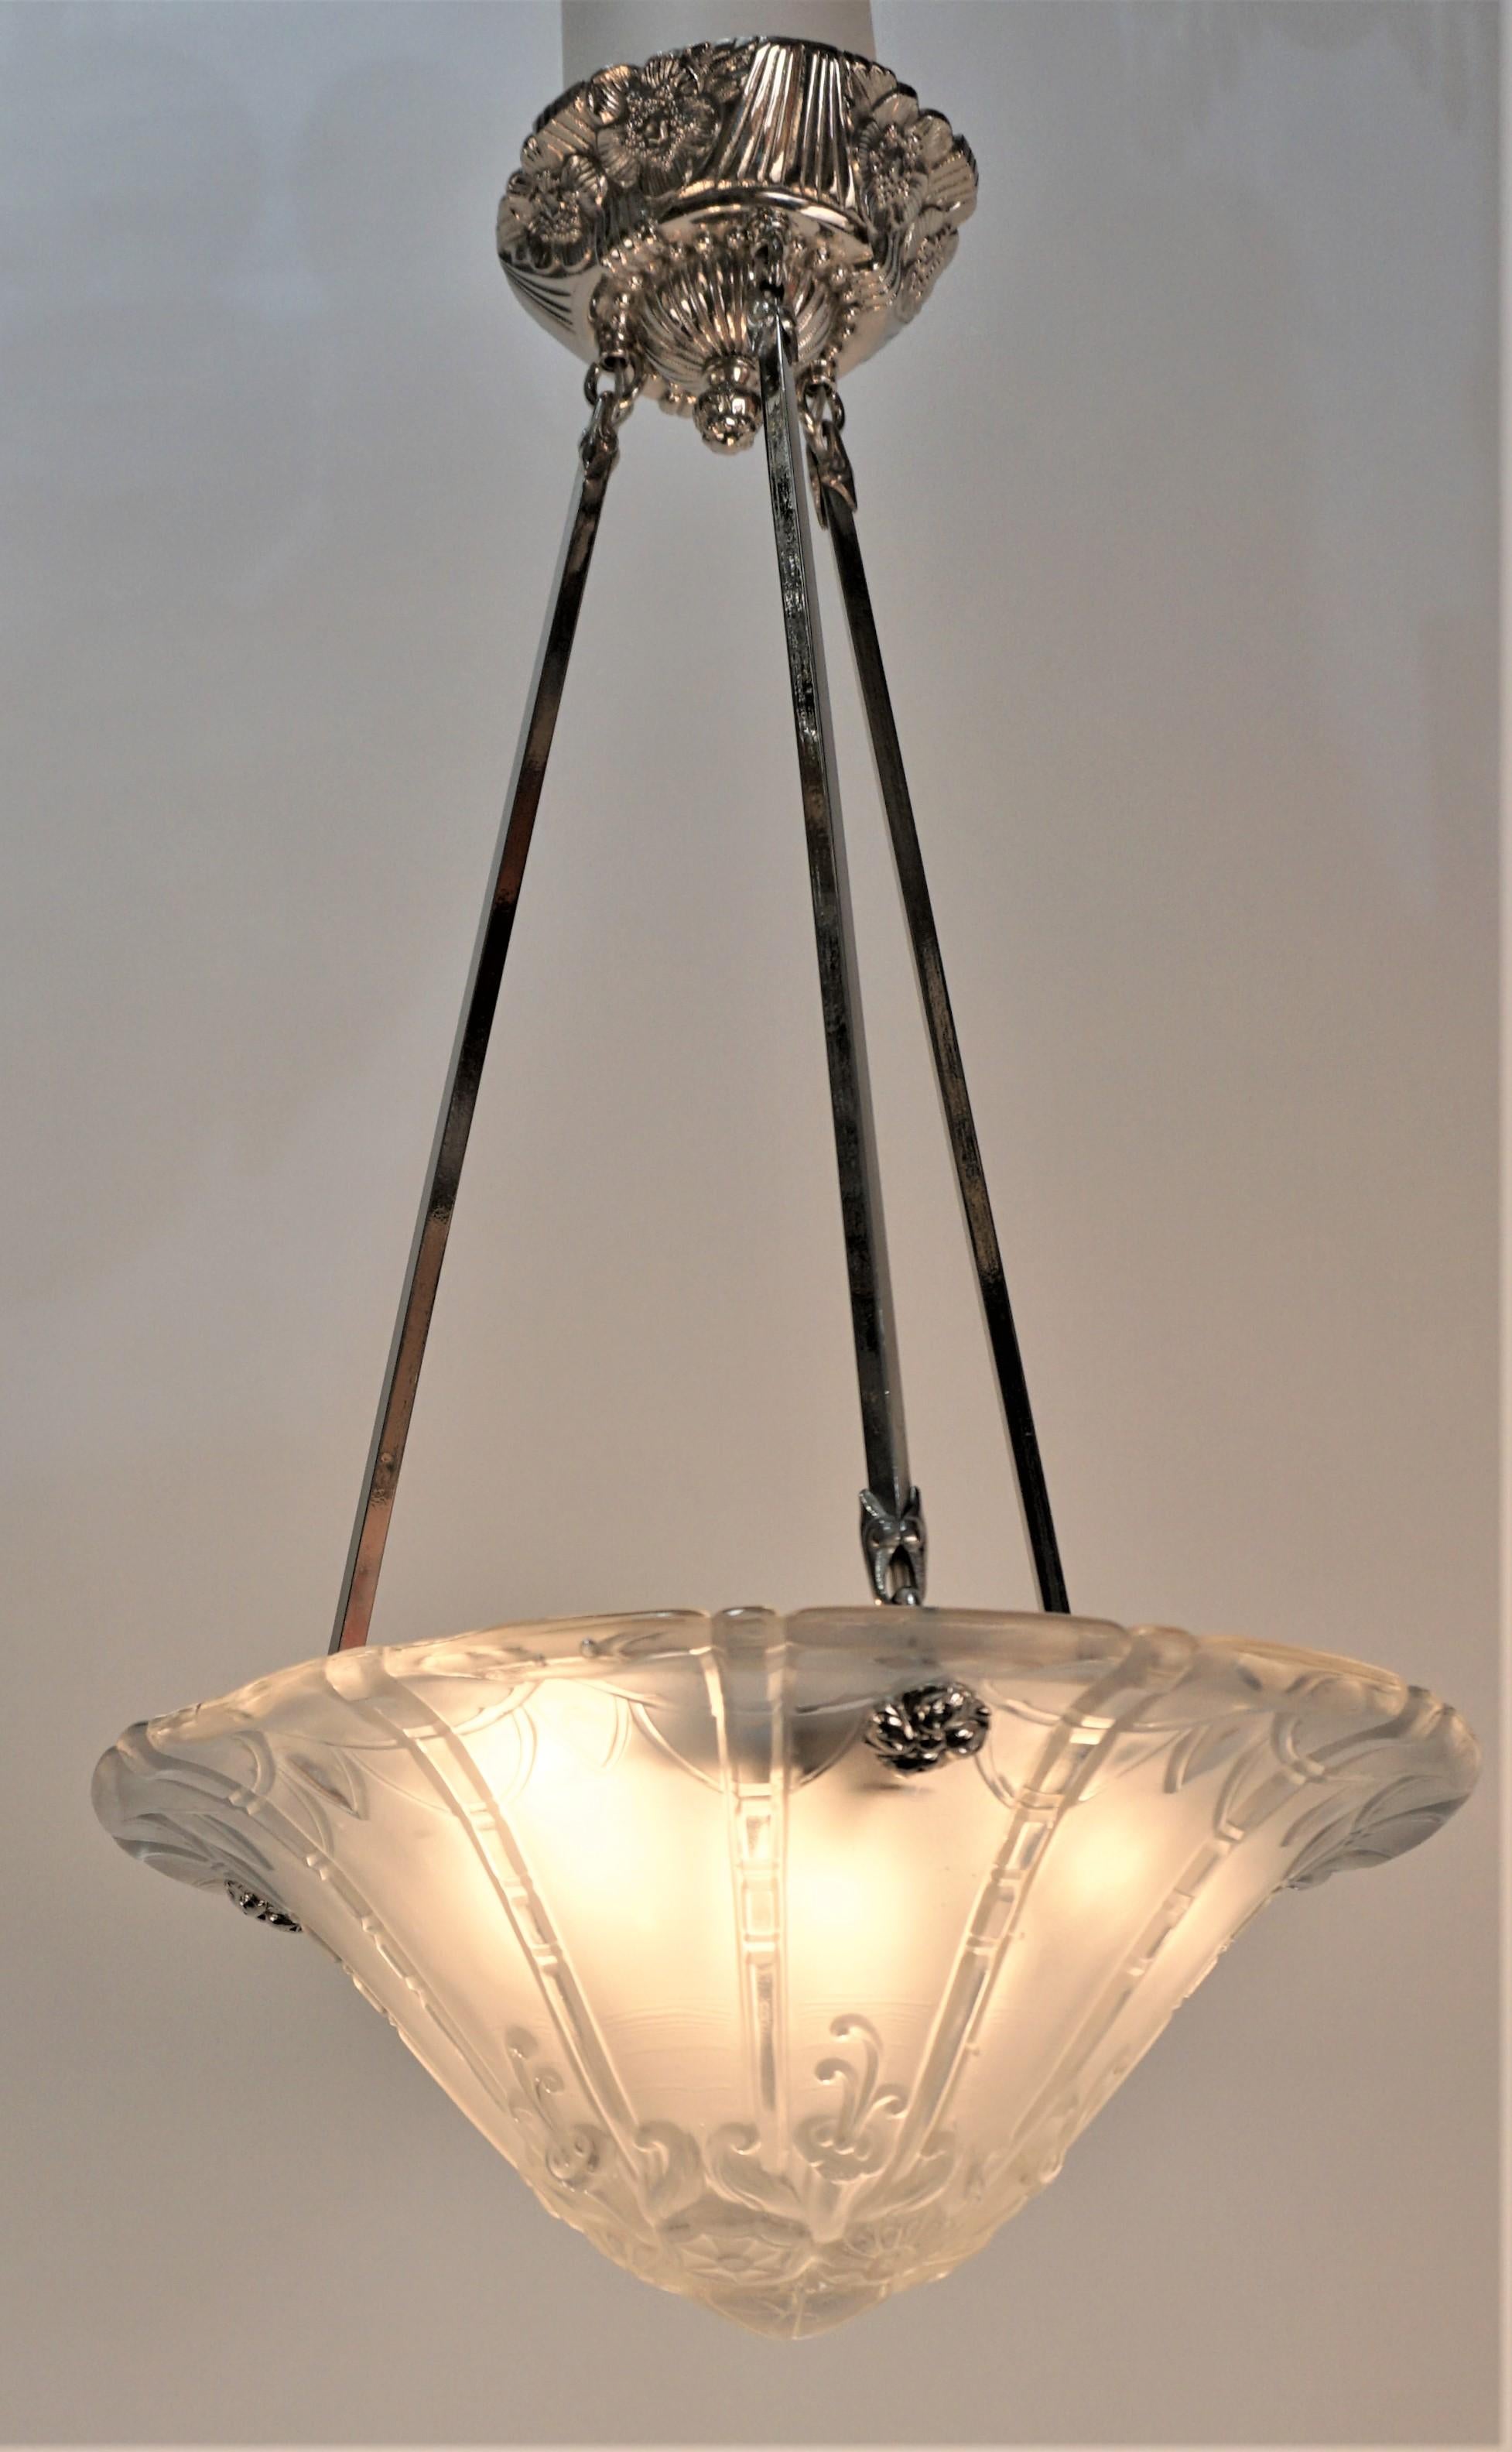 Early 20th Century French 1920s Art Deco Chandelier by Daum/Lorrain For Sale